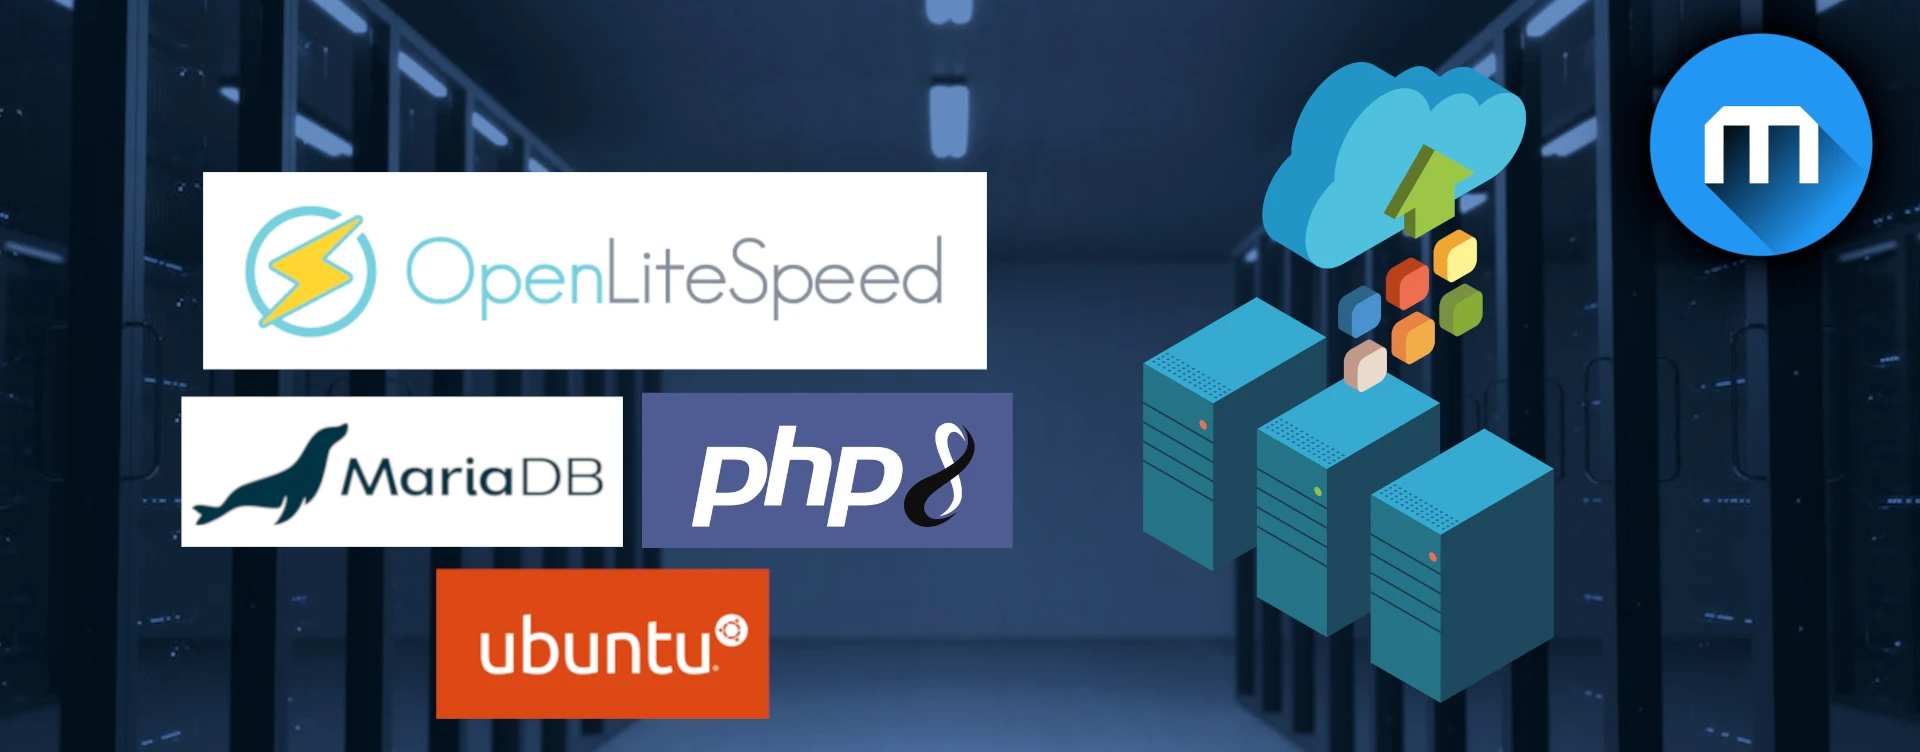 How To Install Linux, OpenLiteSpeed, MariaDB, PHP (LOMP stack) on Ubuntu 22.04